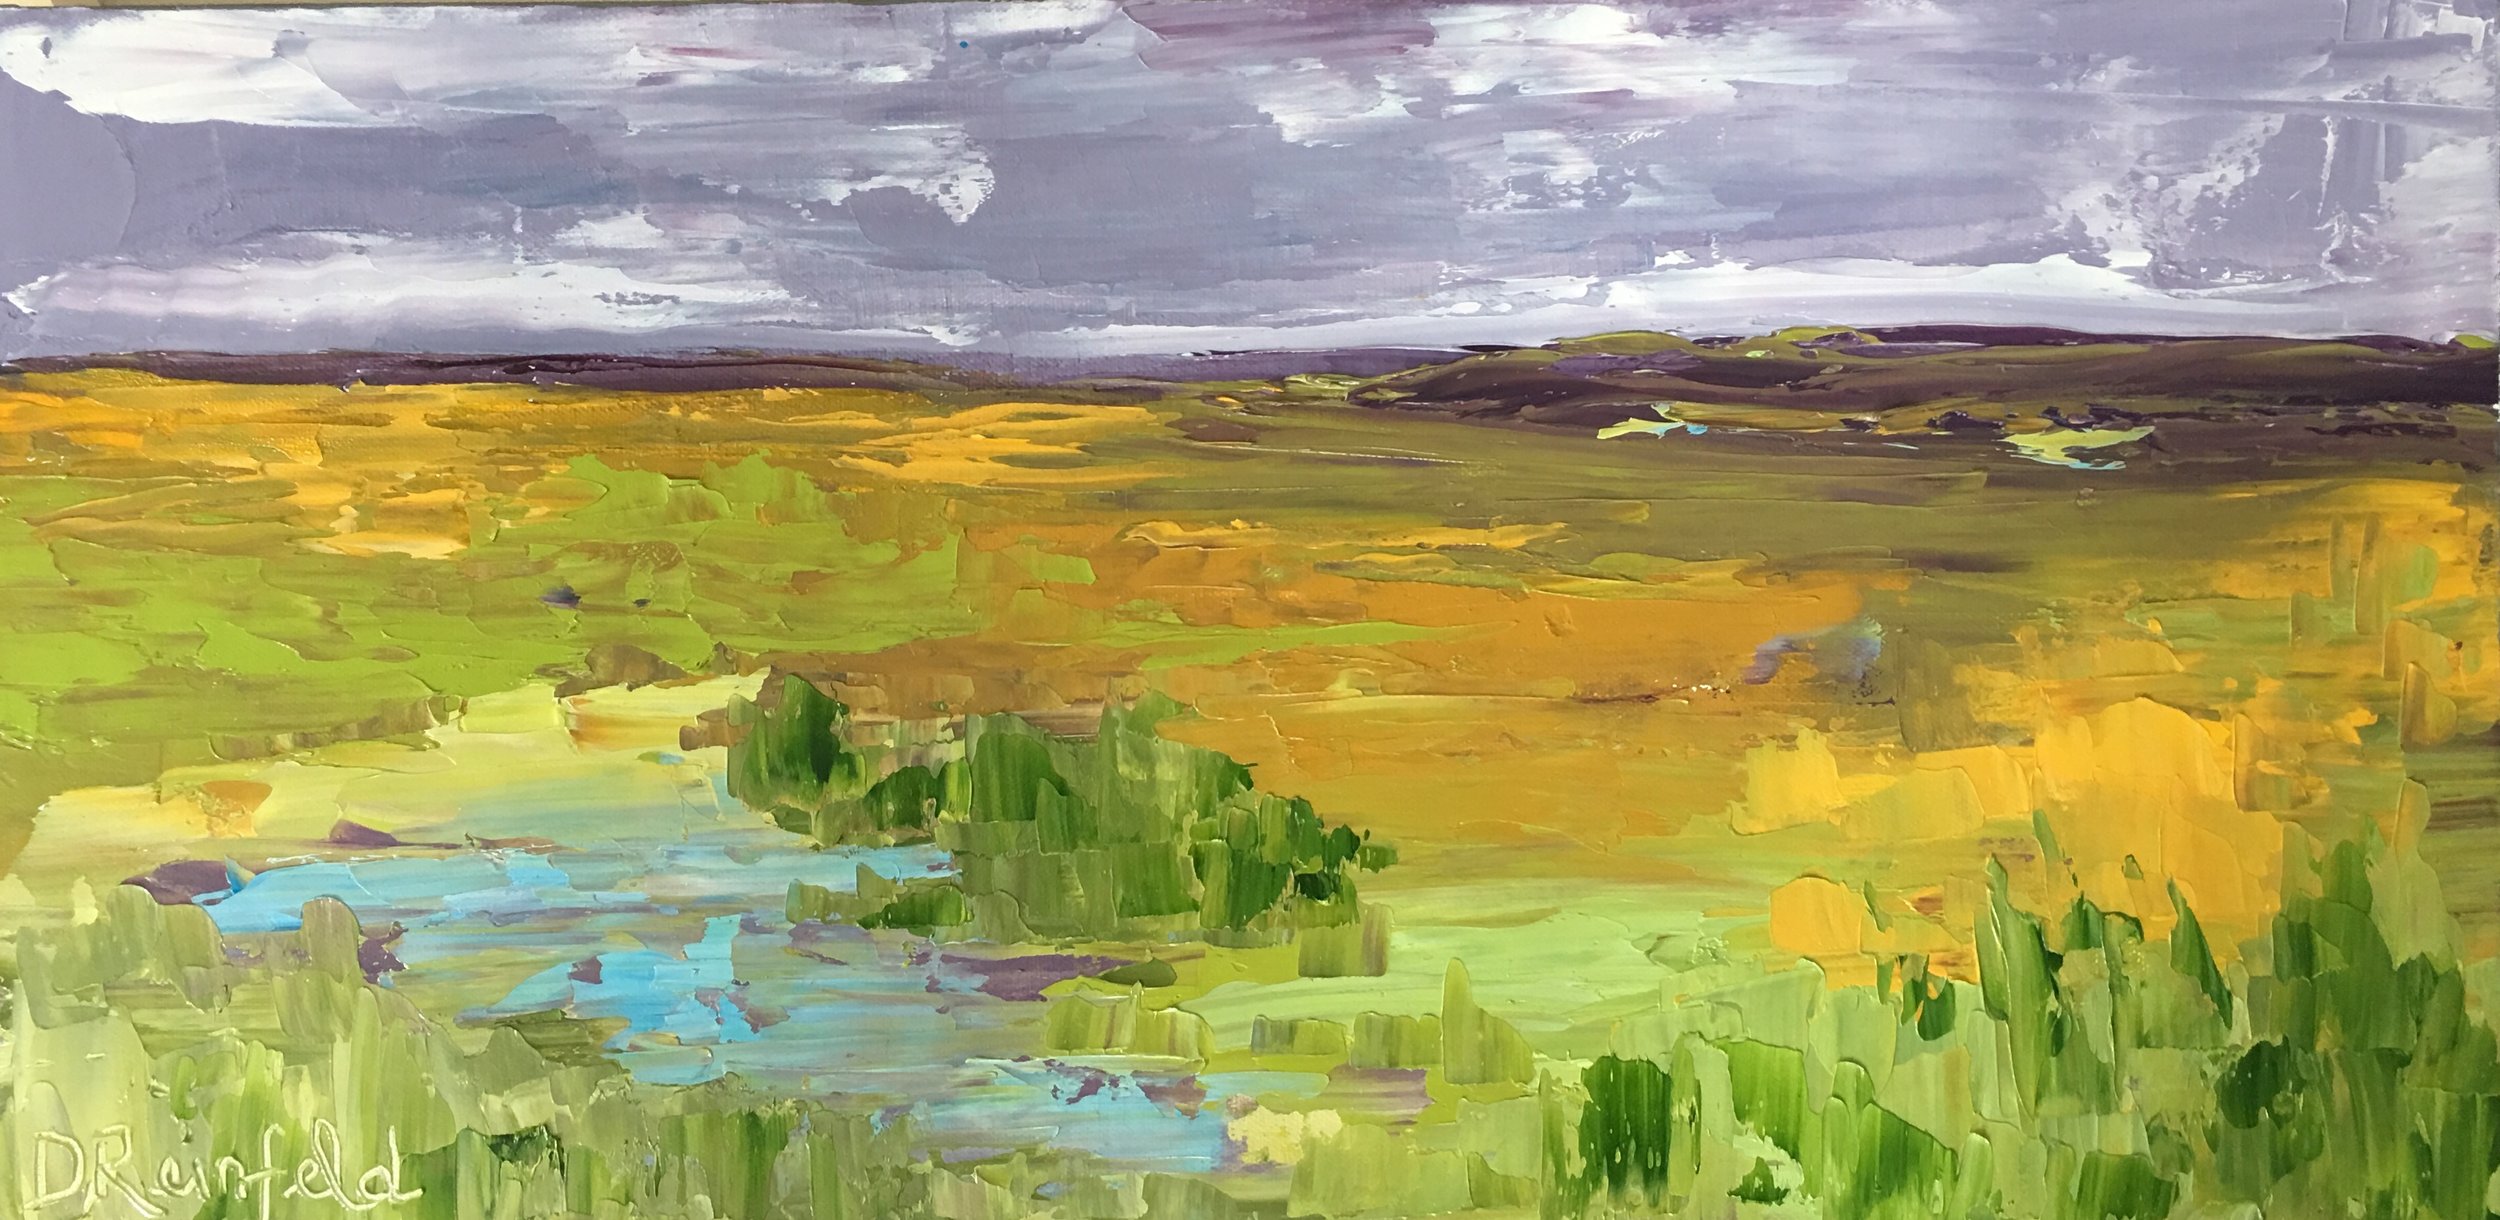 Big Sky, Open Plains, oil on canvas, 12"x24" SOLD